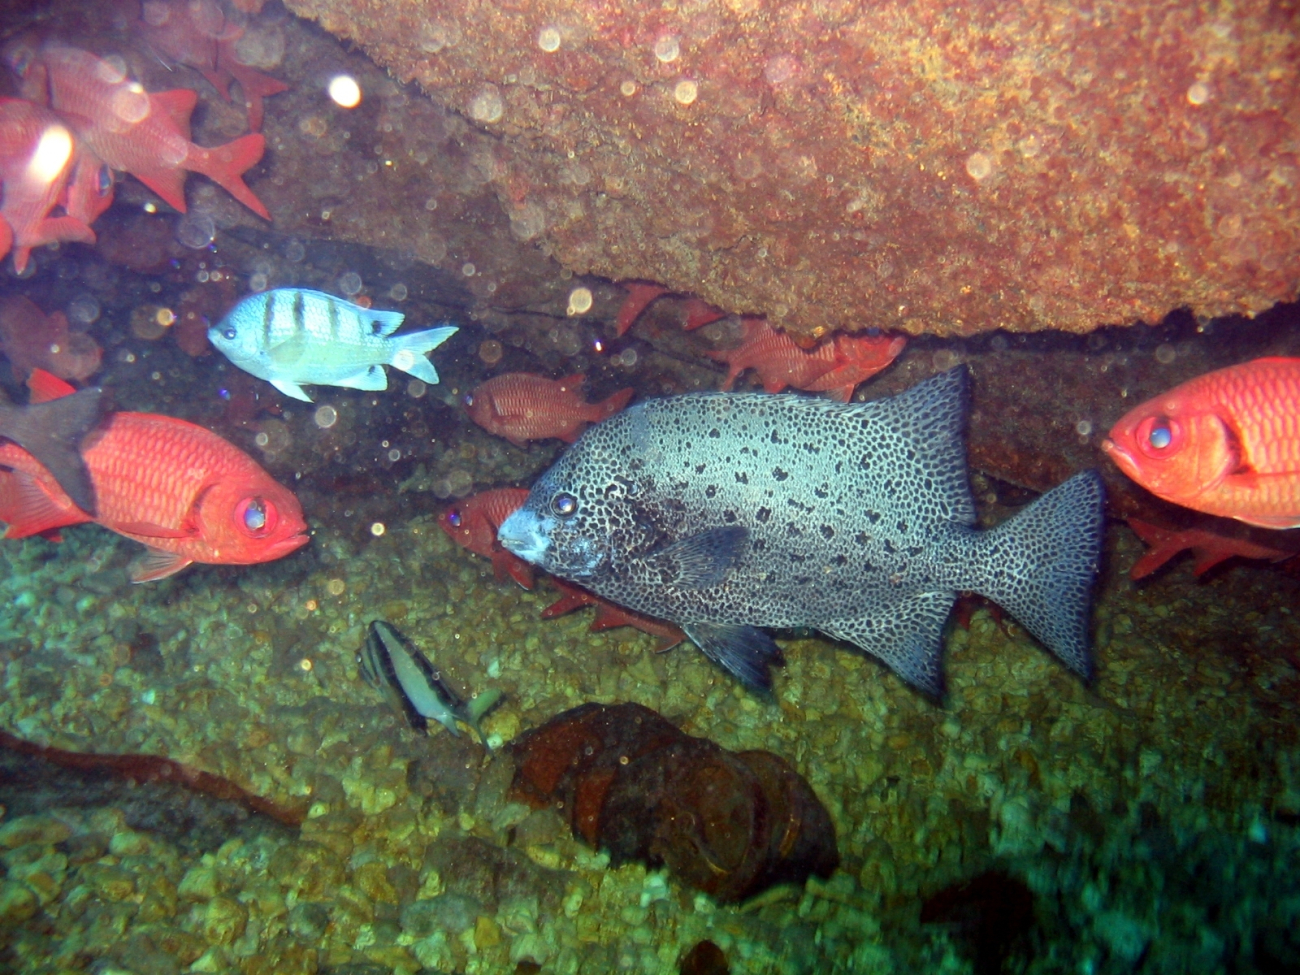 A spotted knifejaw (Oplegnathus punctatus) in center with bigeyes anddamselfish